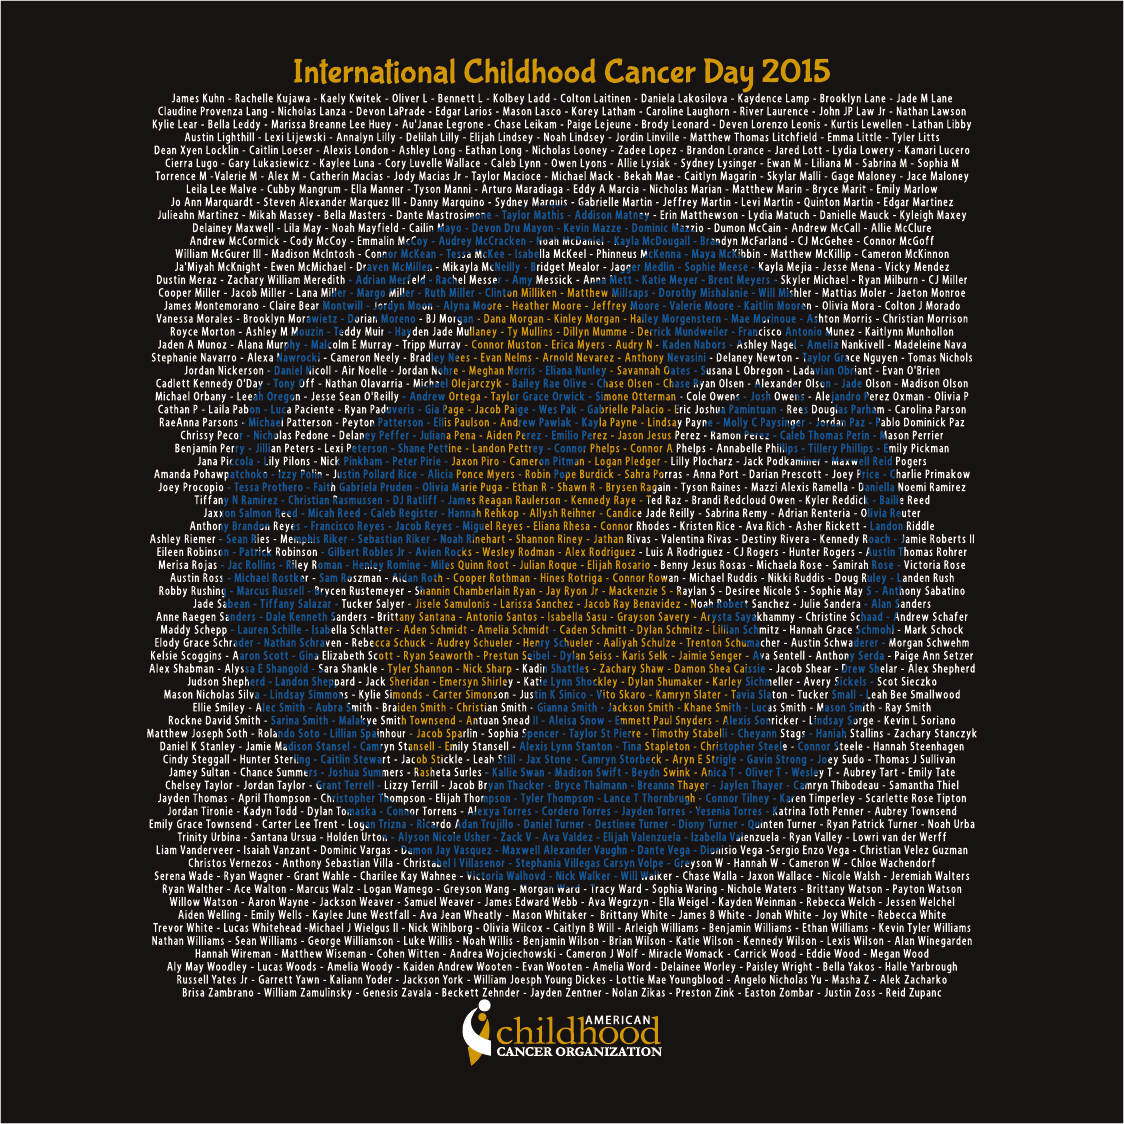 ACCO - International Childhood Cancer Day - 2015 shirt design - zoomed